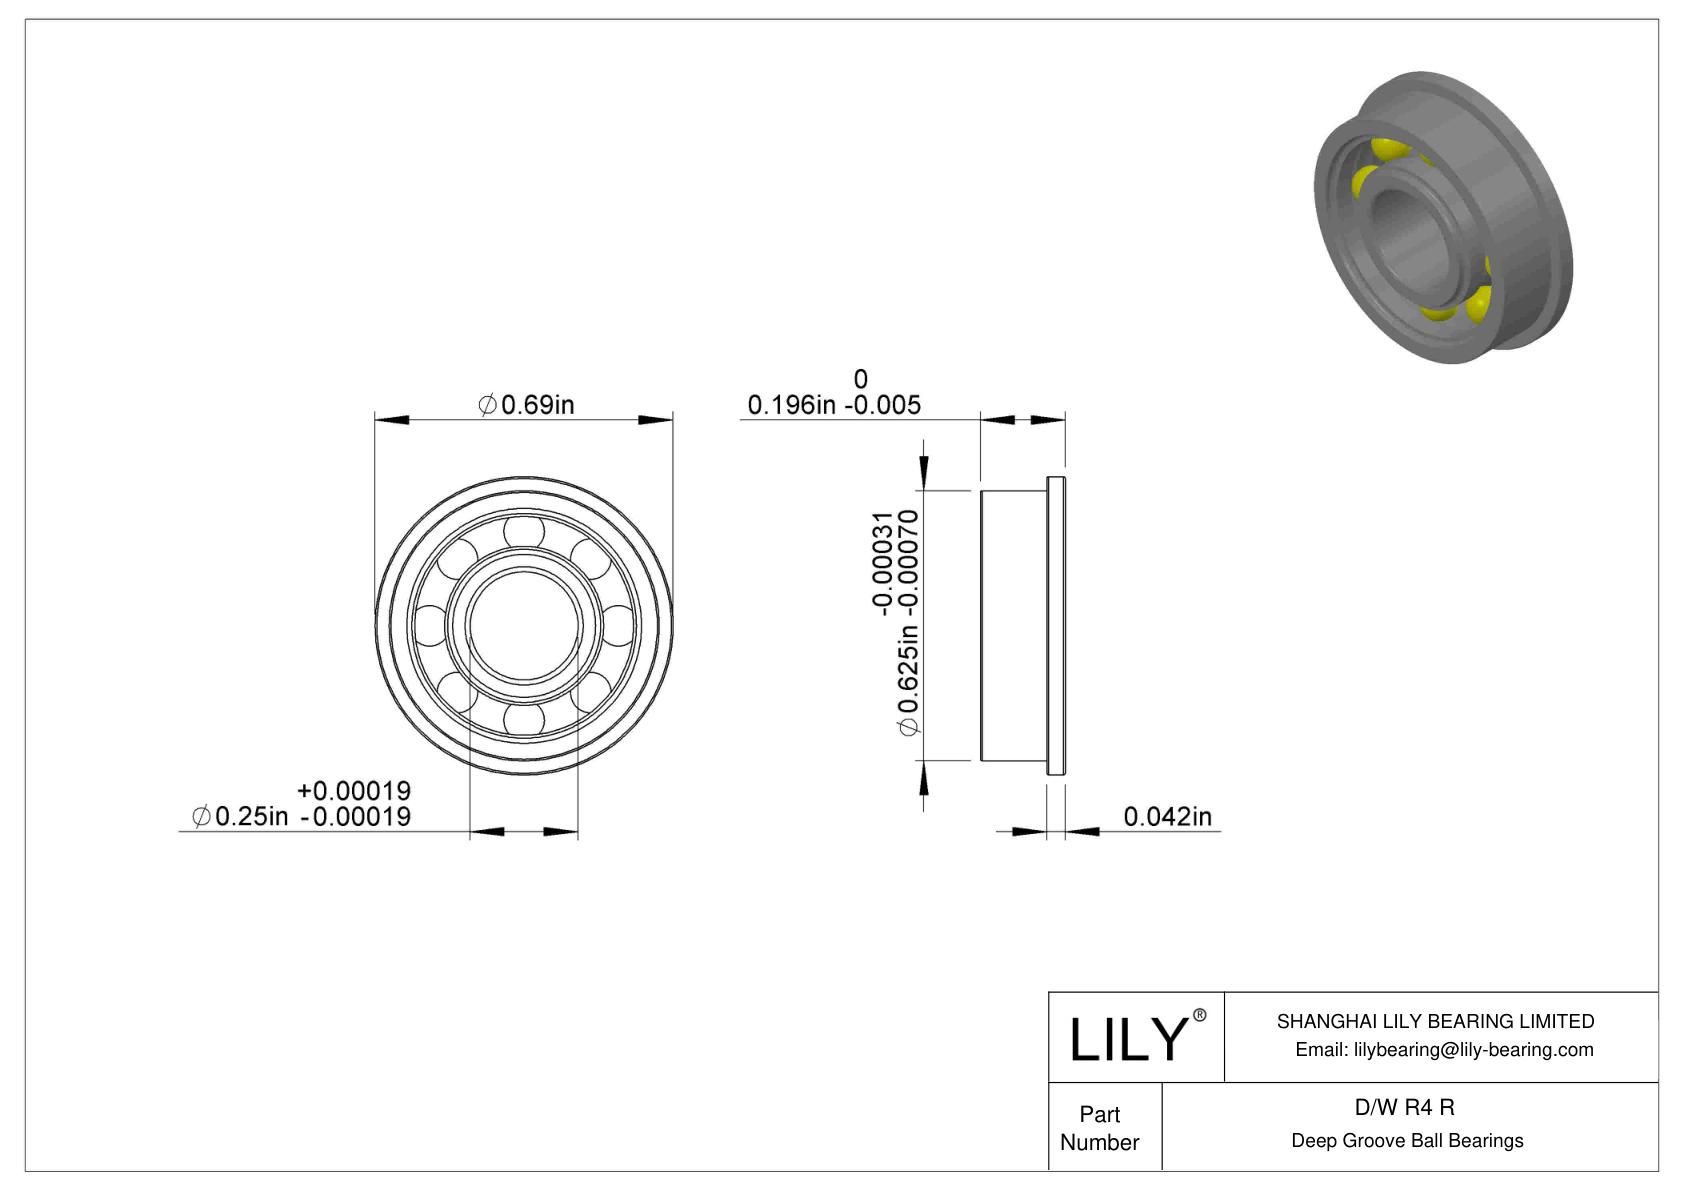 D/W R4 R Flanged Ball Bearings cad drawing